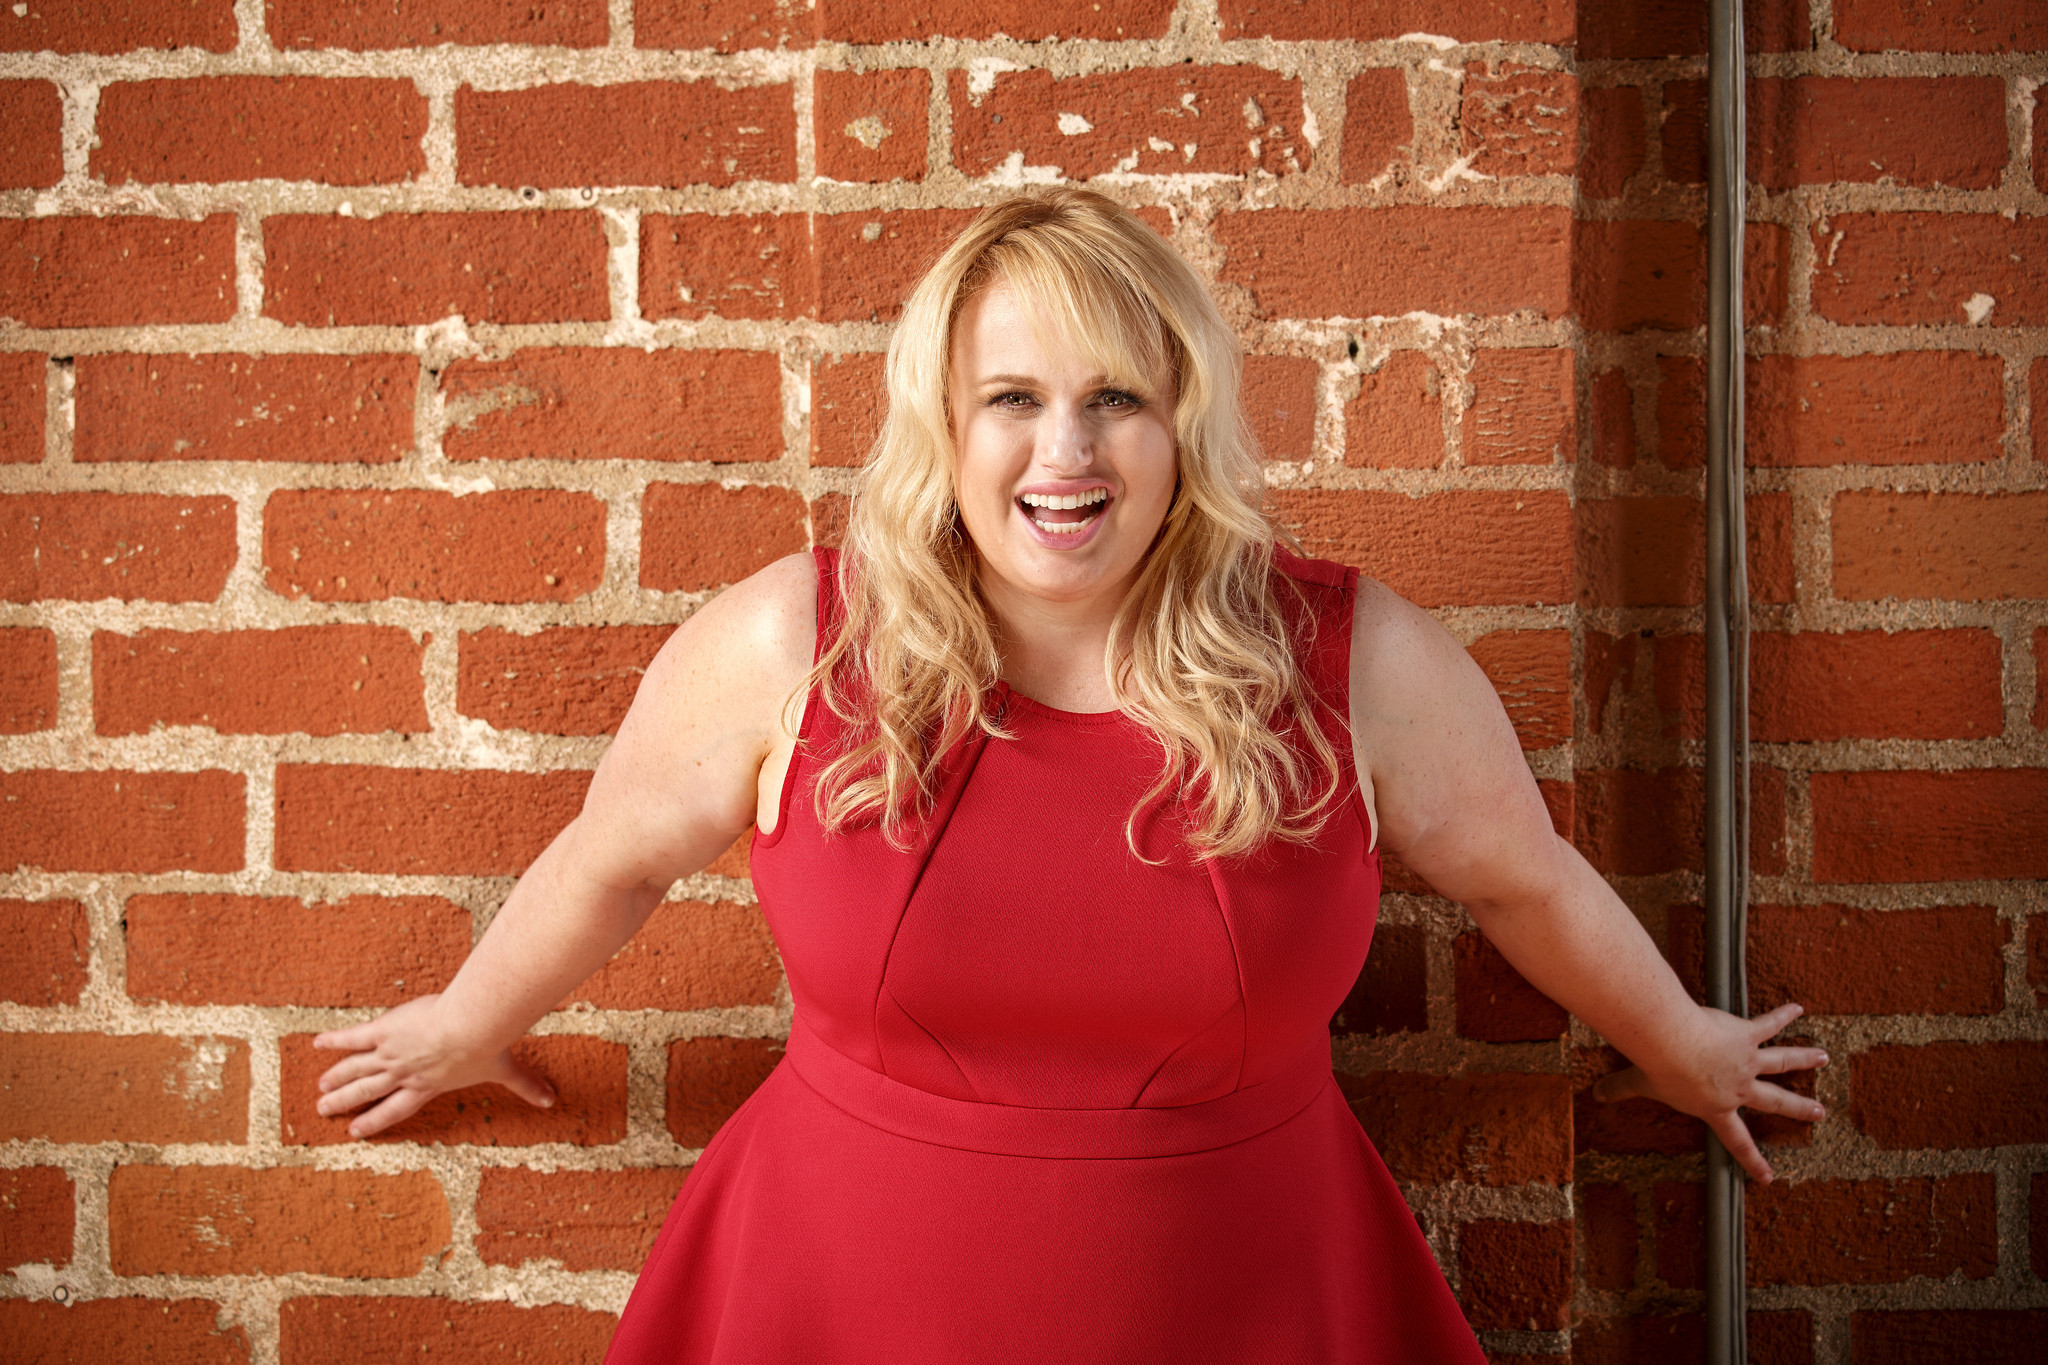 Rebel Wilson scales new heights in 'Pitch Perfect 2'